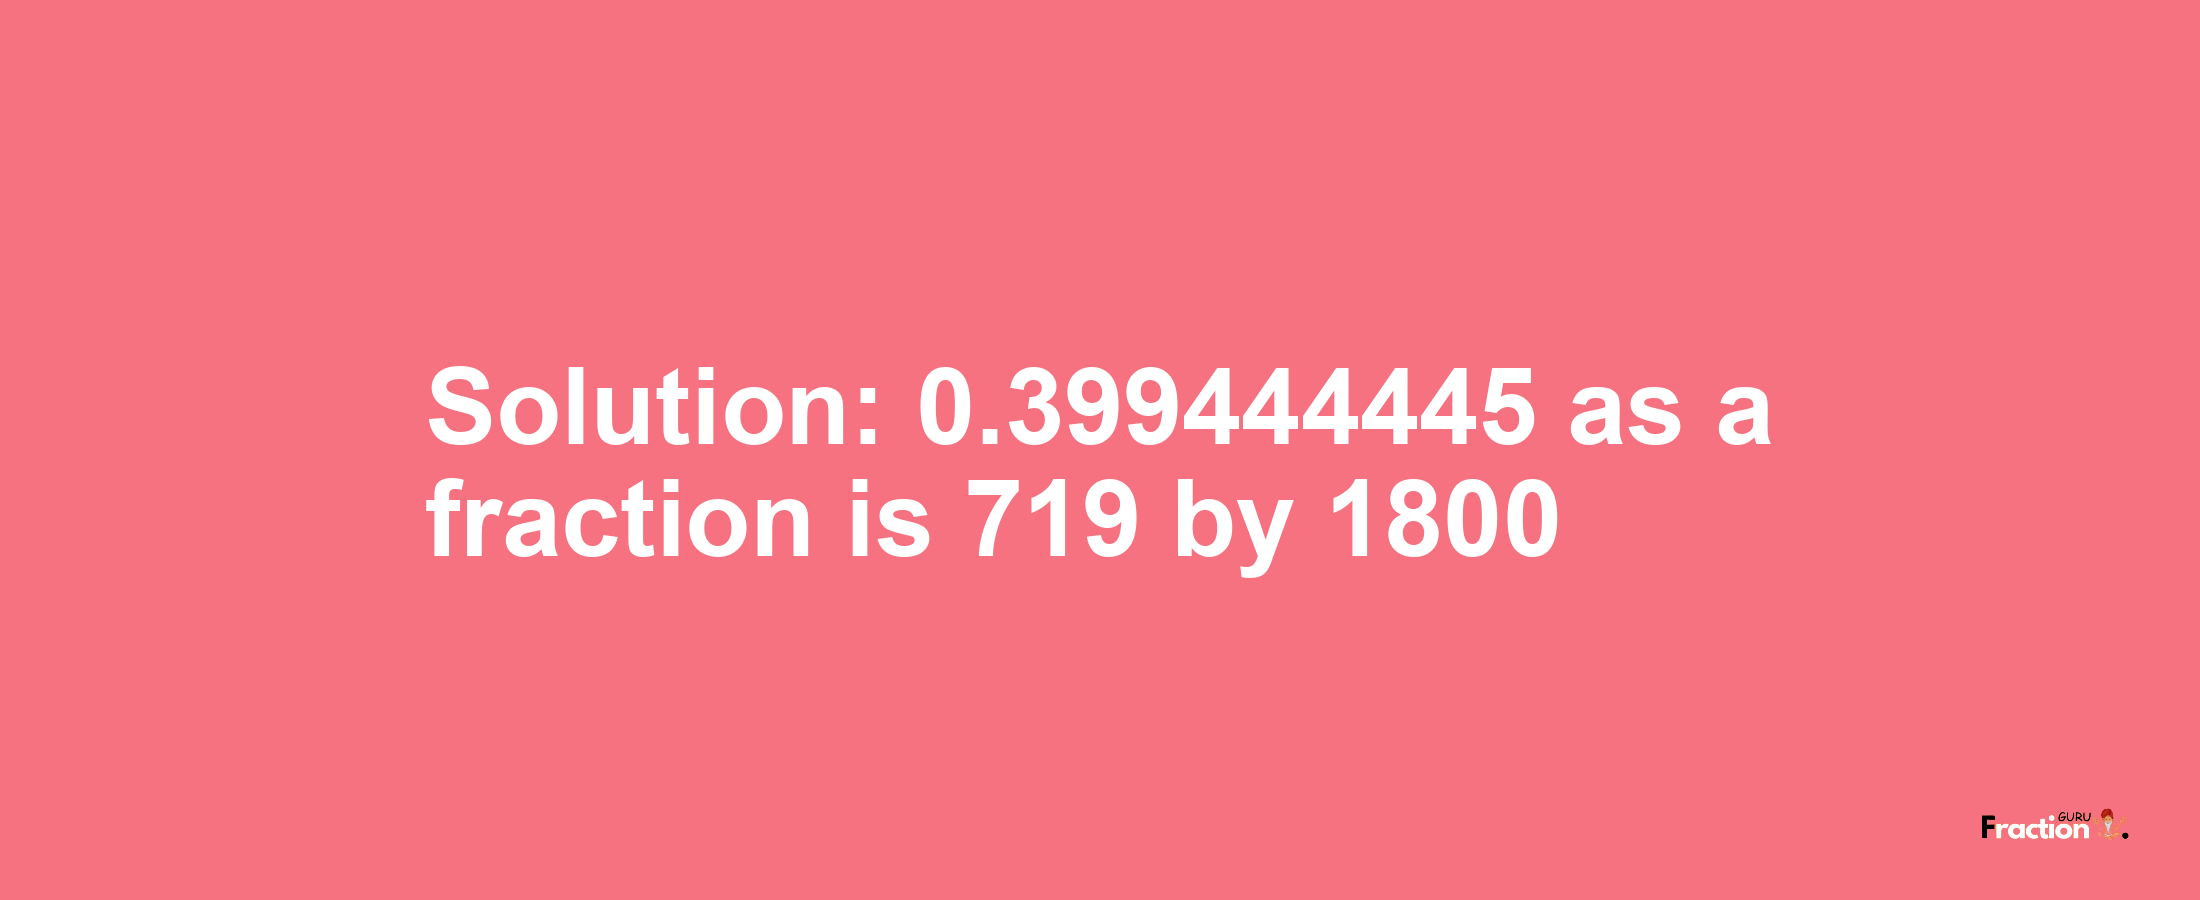 Solution:0.399444445 as a fraction is 719/1800